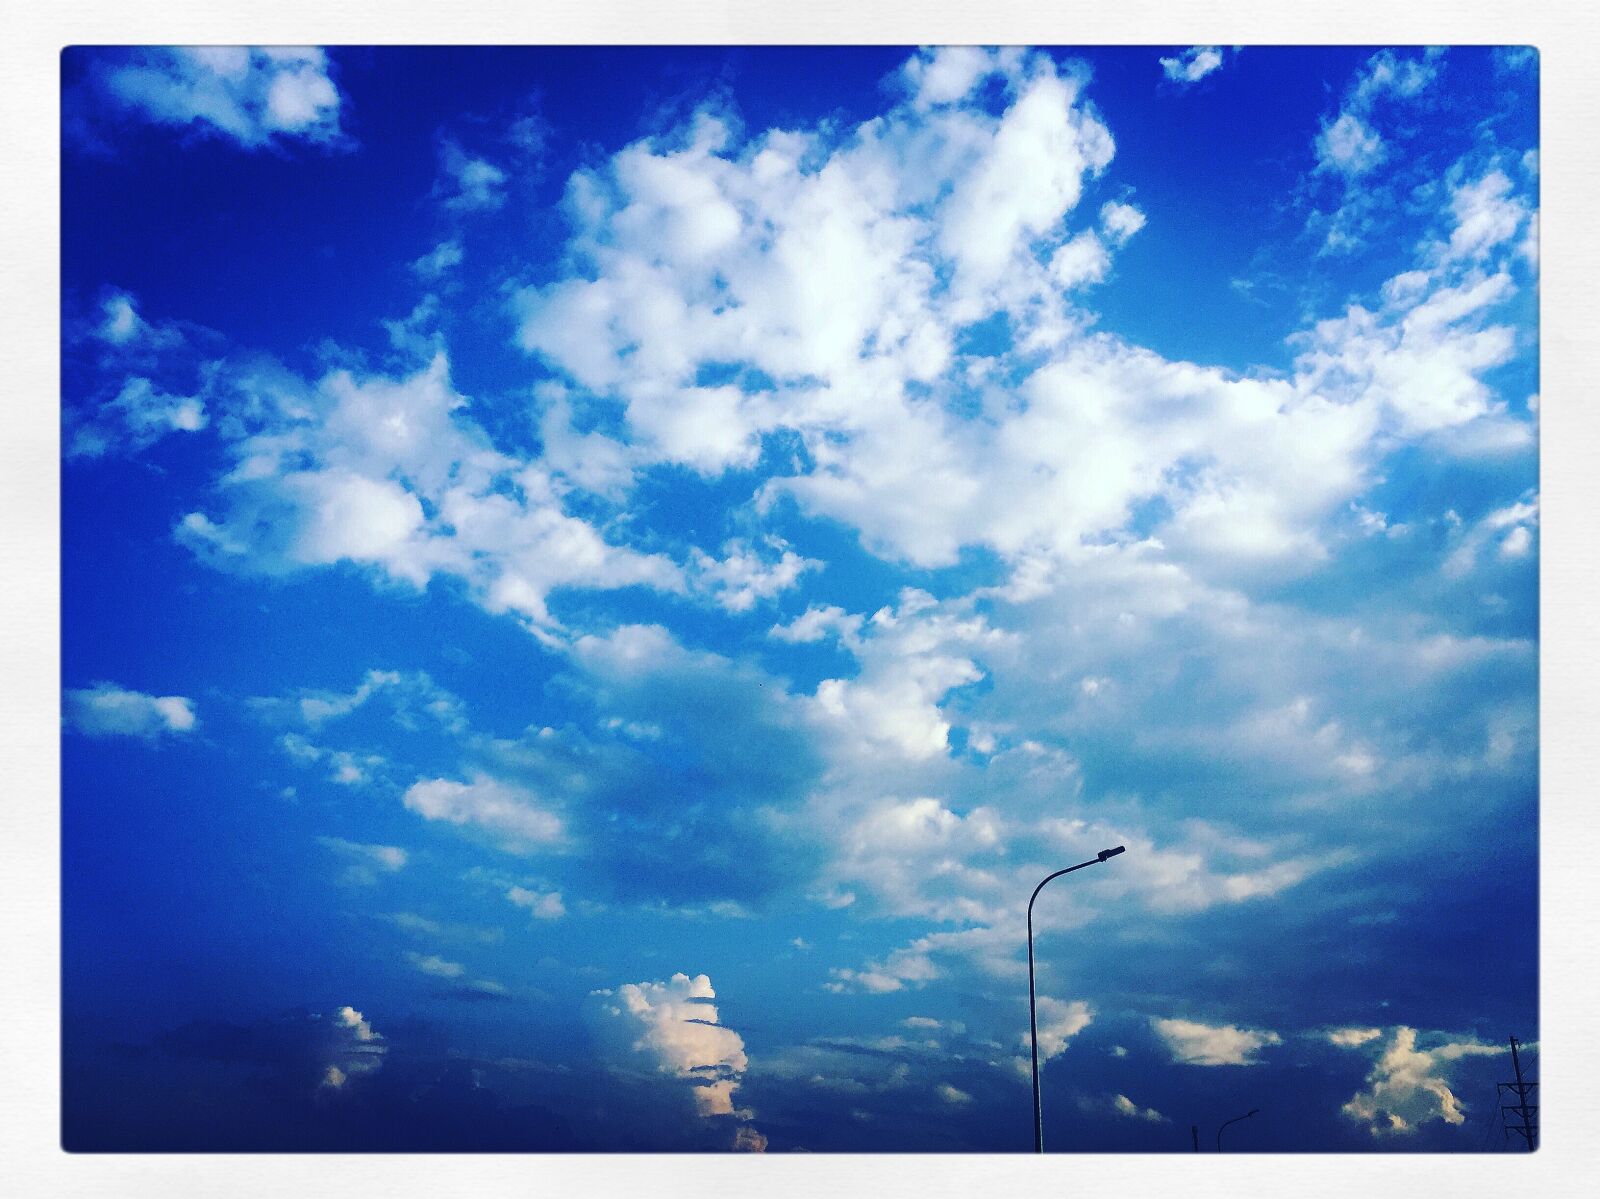 Apple iPhone 6 sample photo. Sky, clouds, peace photography